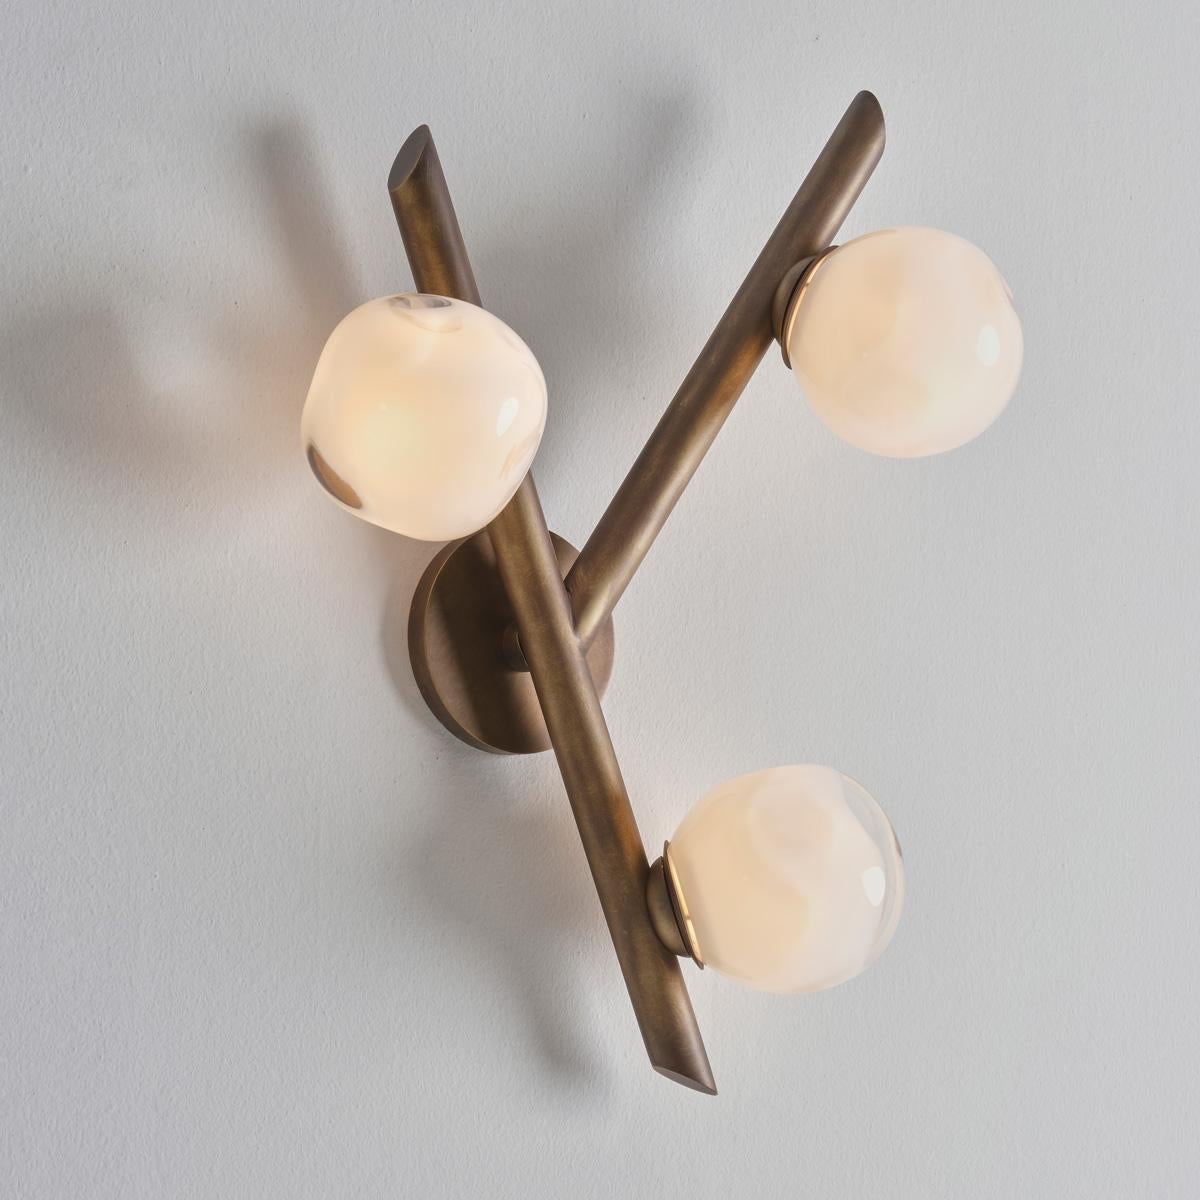 Contemporary Antares Wall Light by Gaspare Asaro- Sand White Finish For Sale